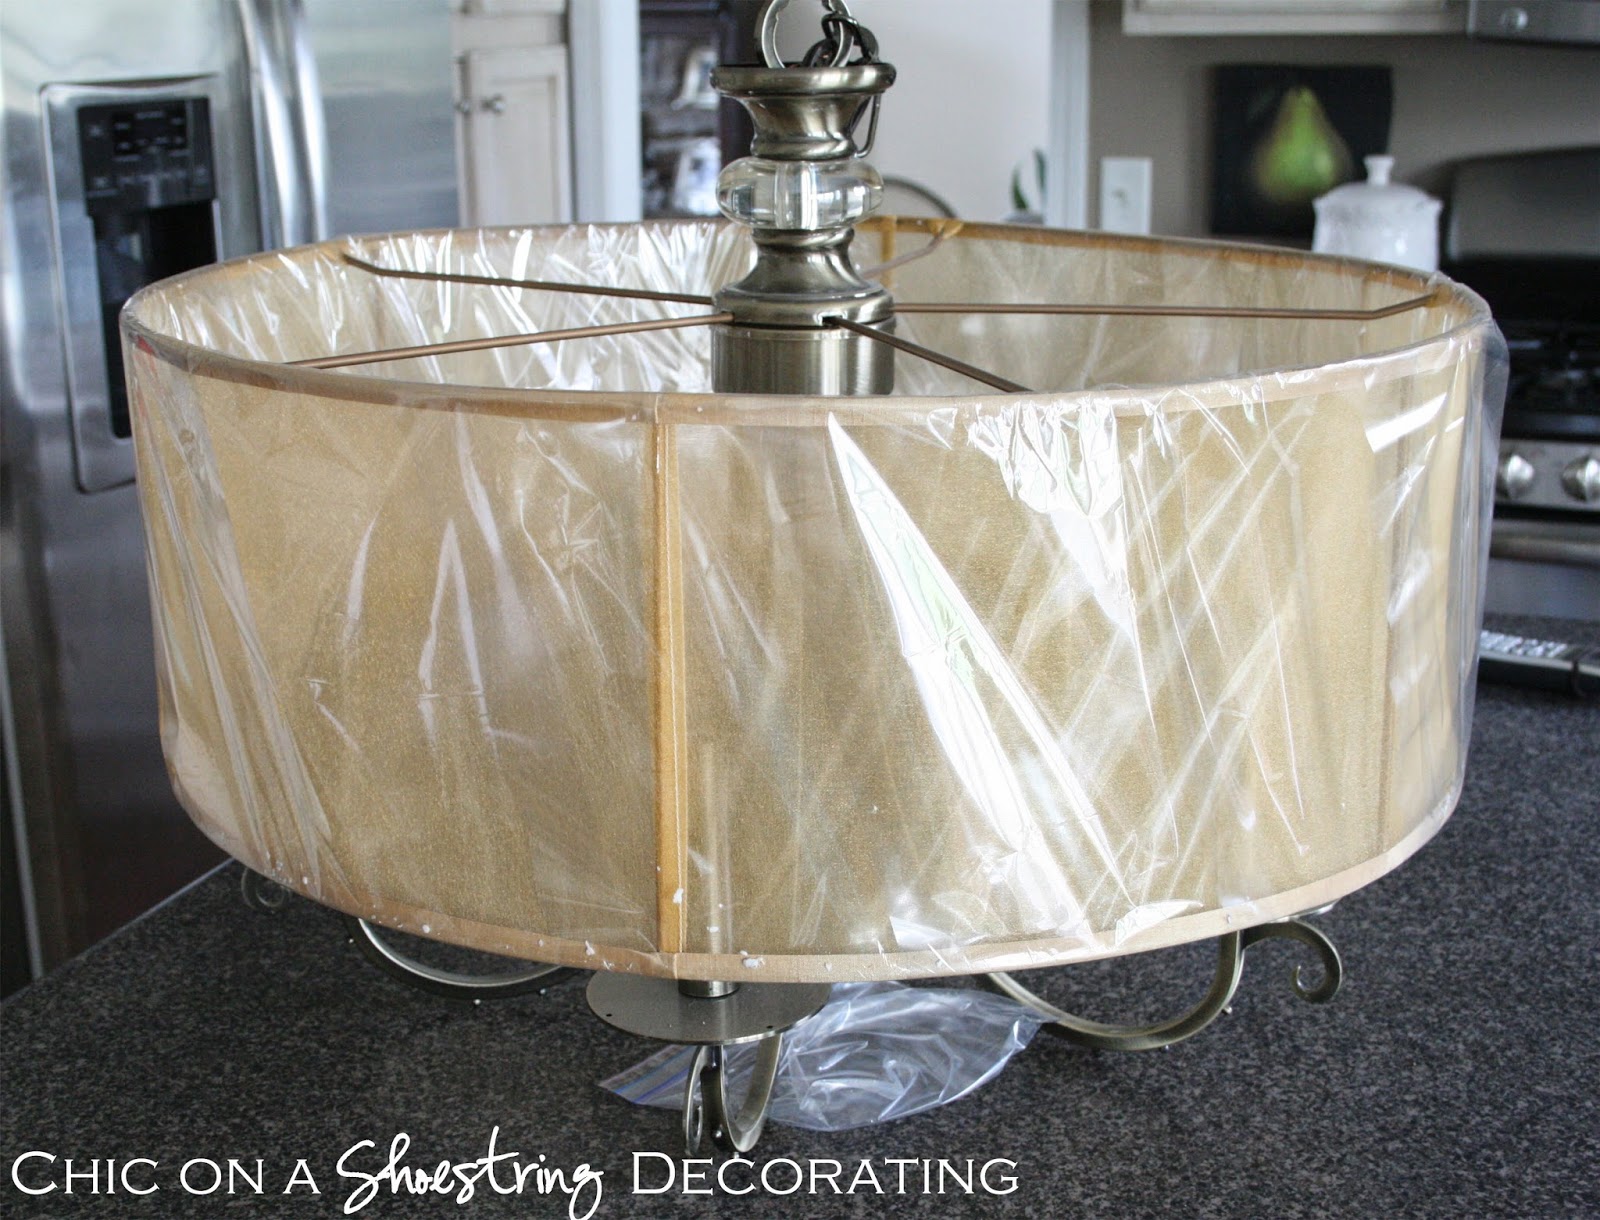 chandelier before, chic on a shoestring decorating blog